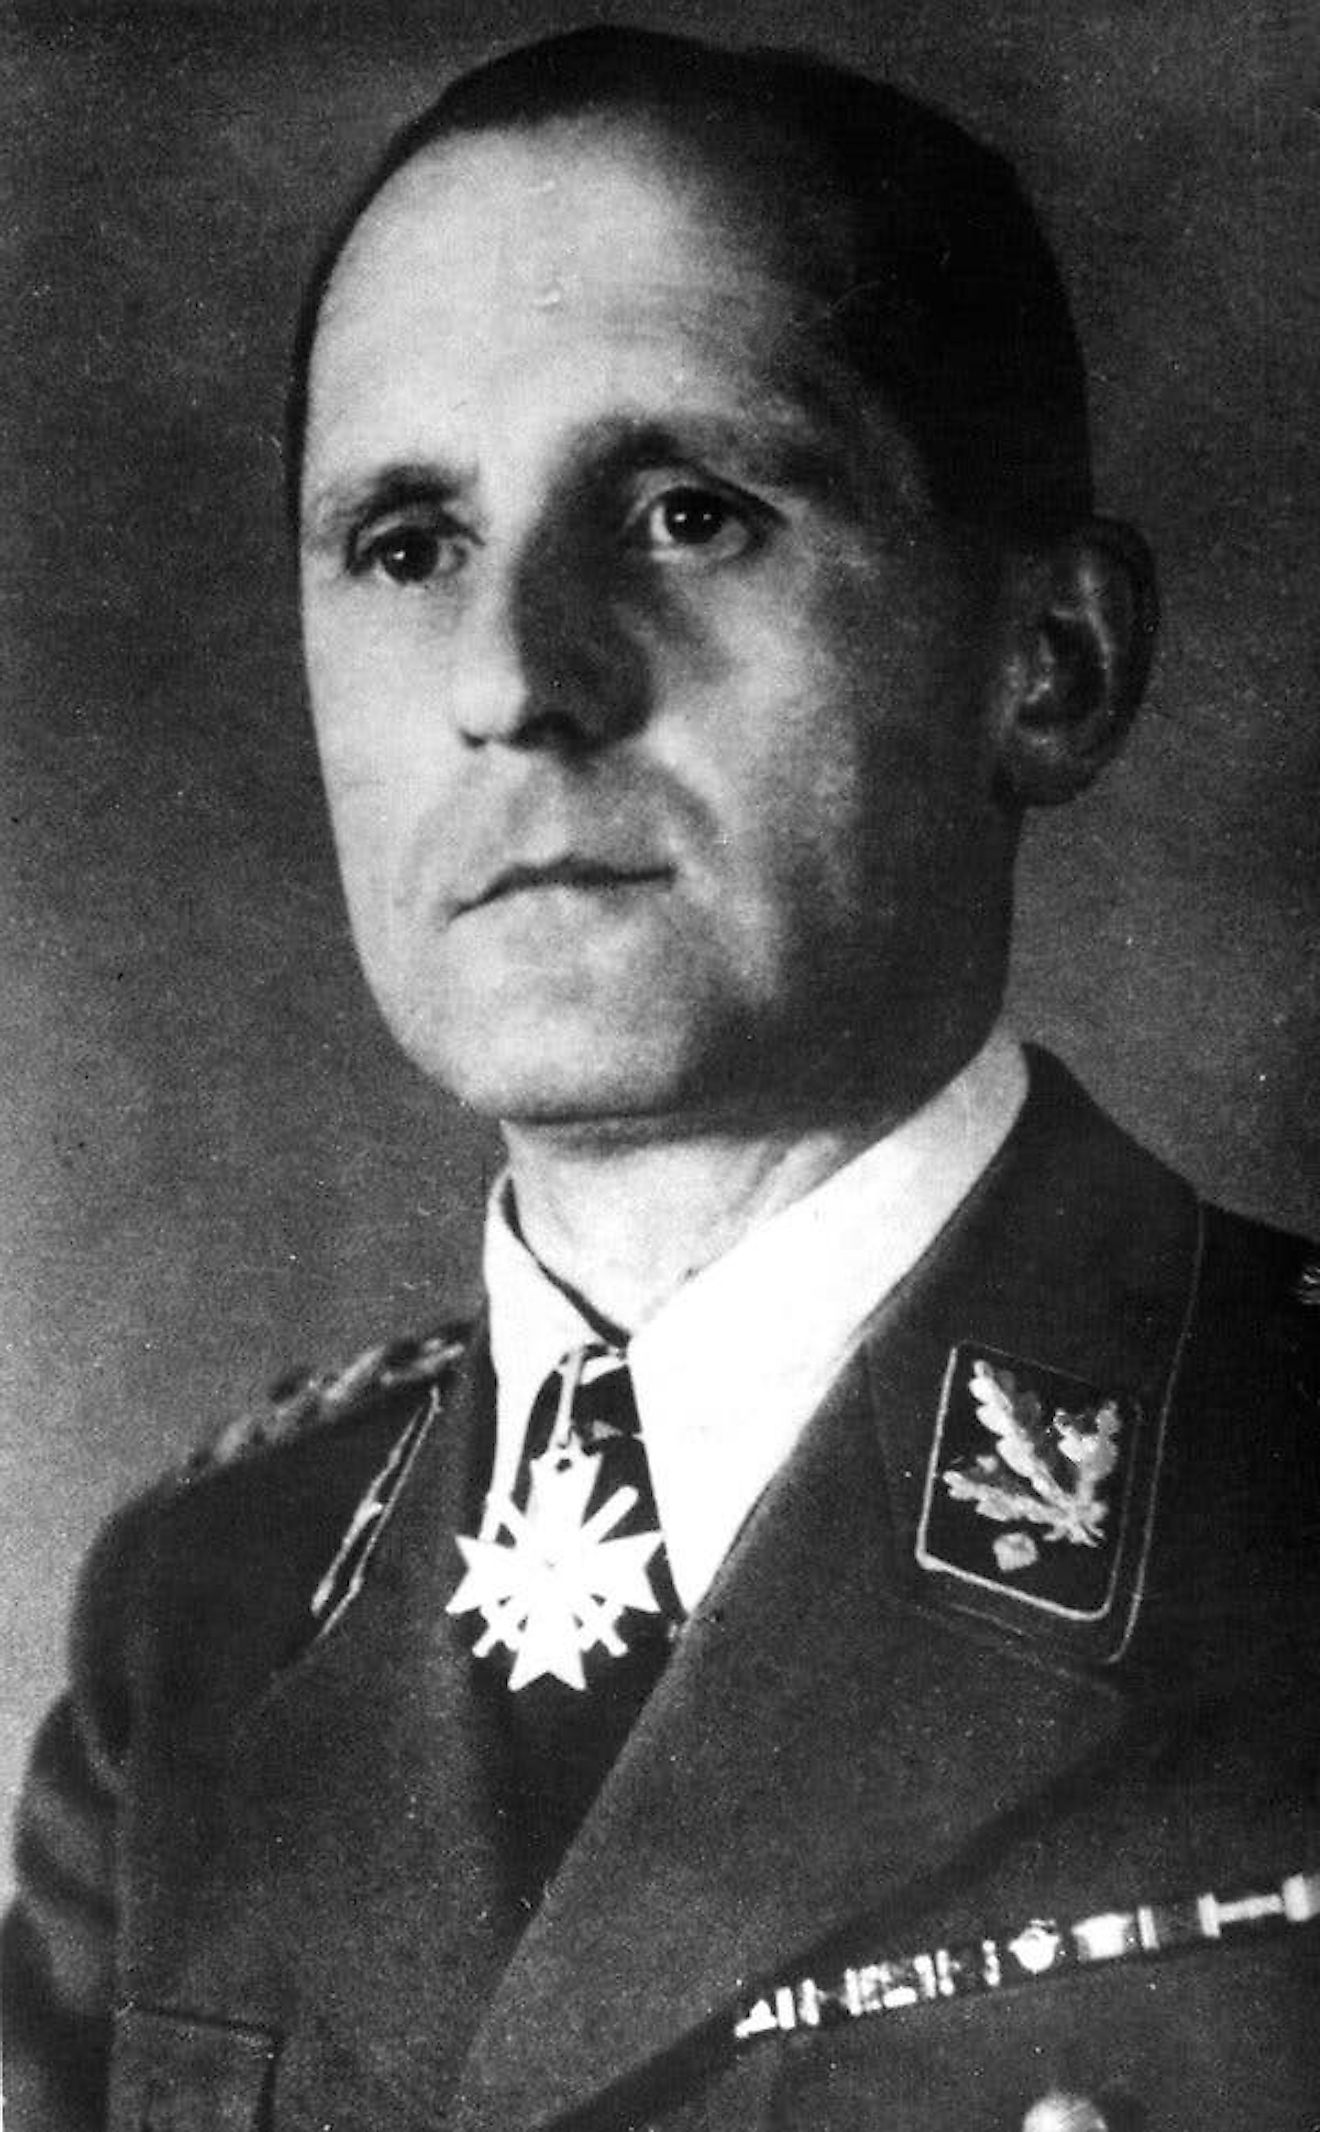 Picture of SS-Gruppenführer Heinrich Müller, the chief of Gestapo, the secret state police of the Nazi Germany.